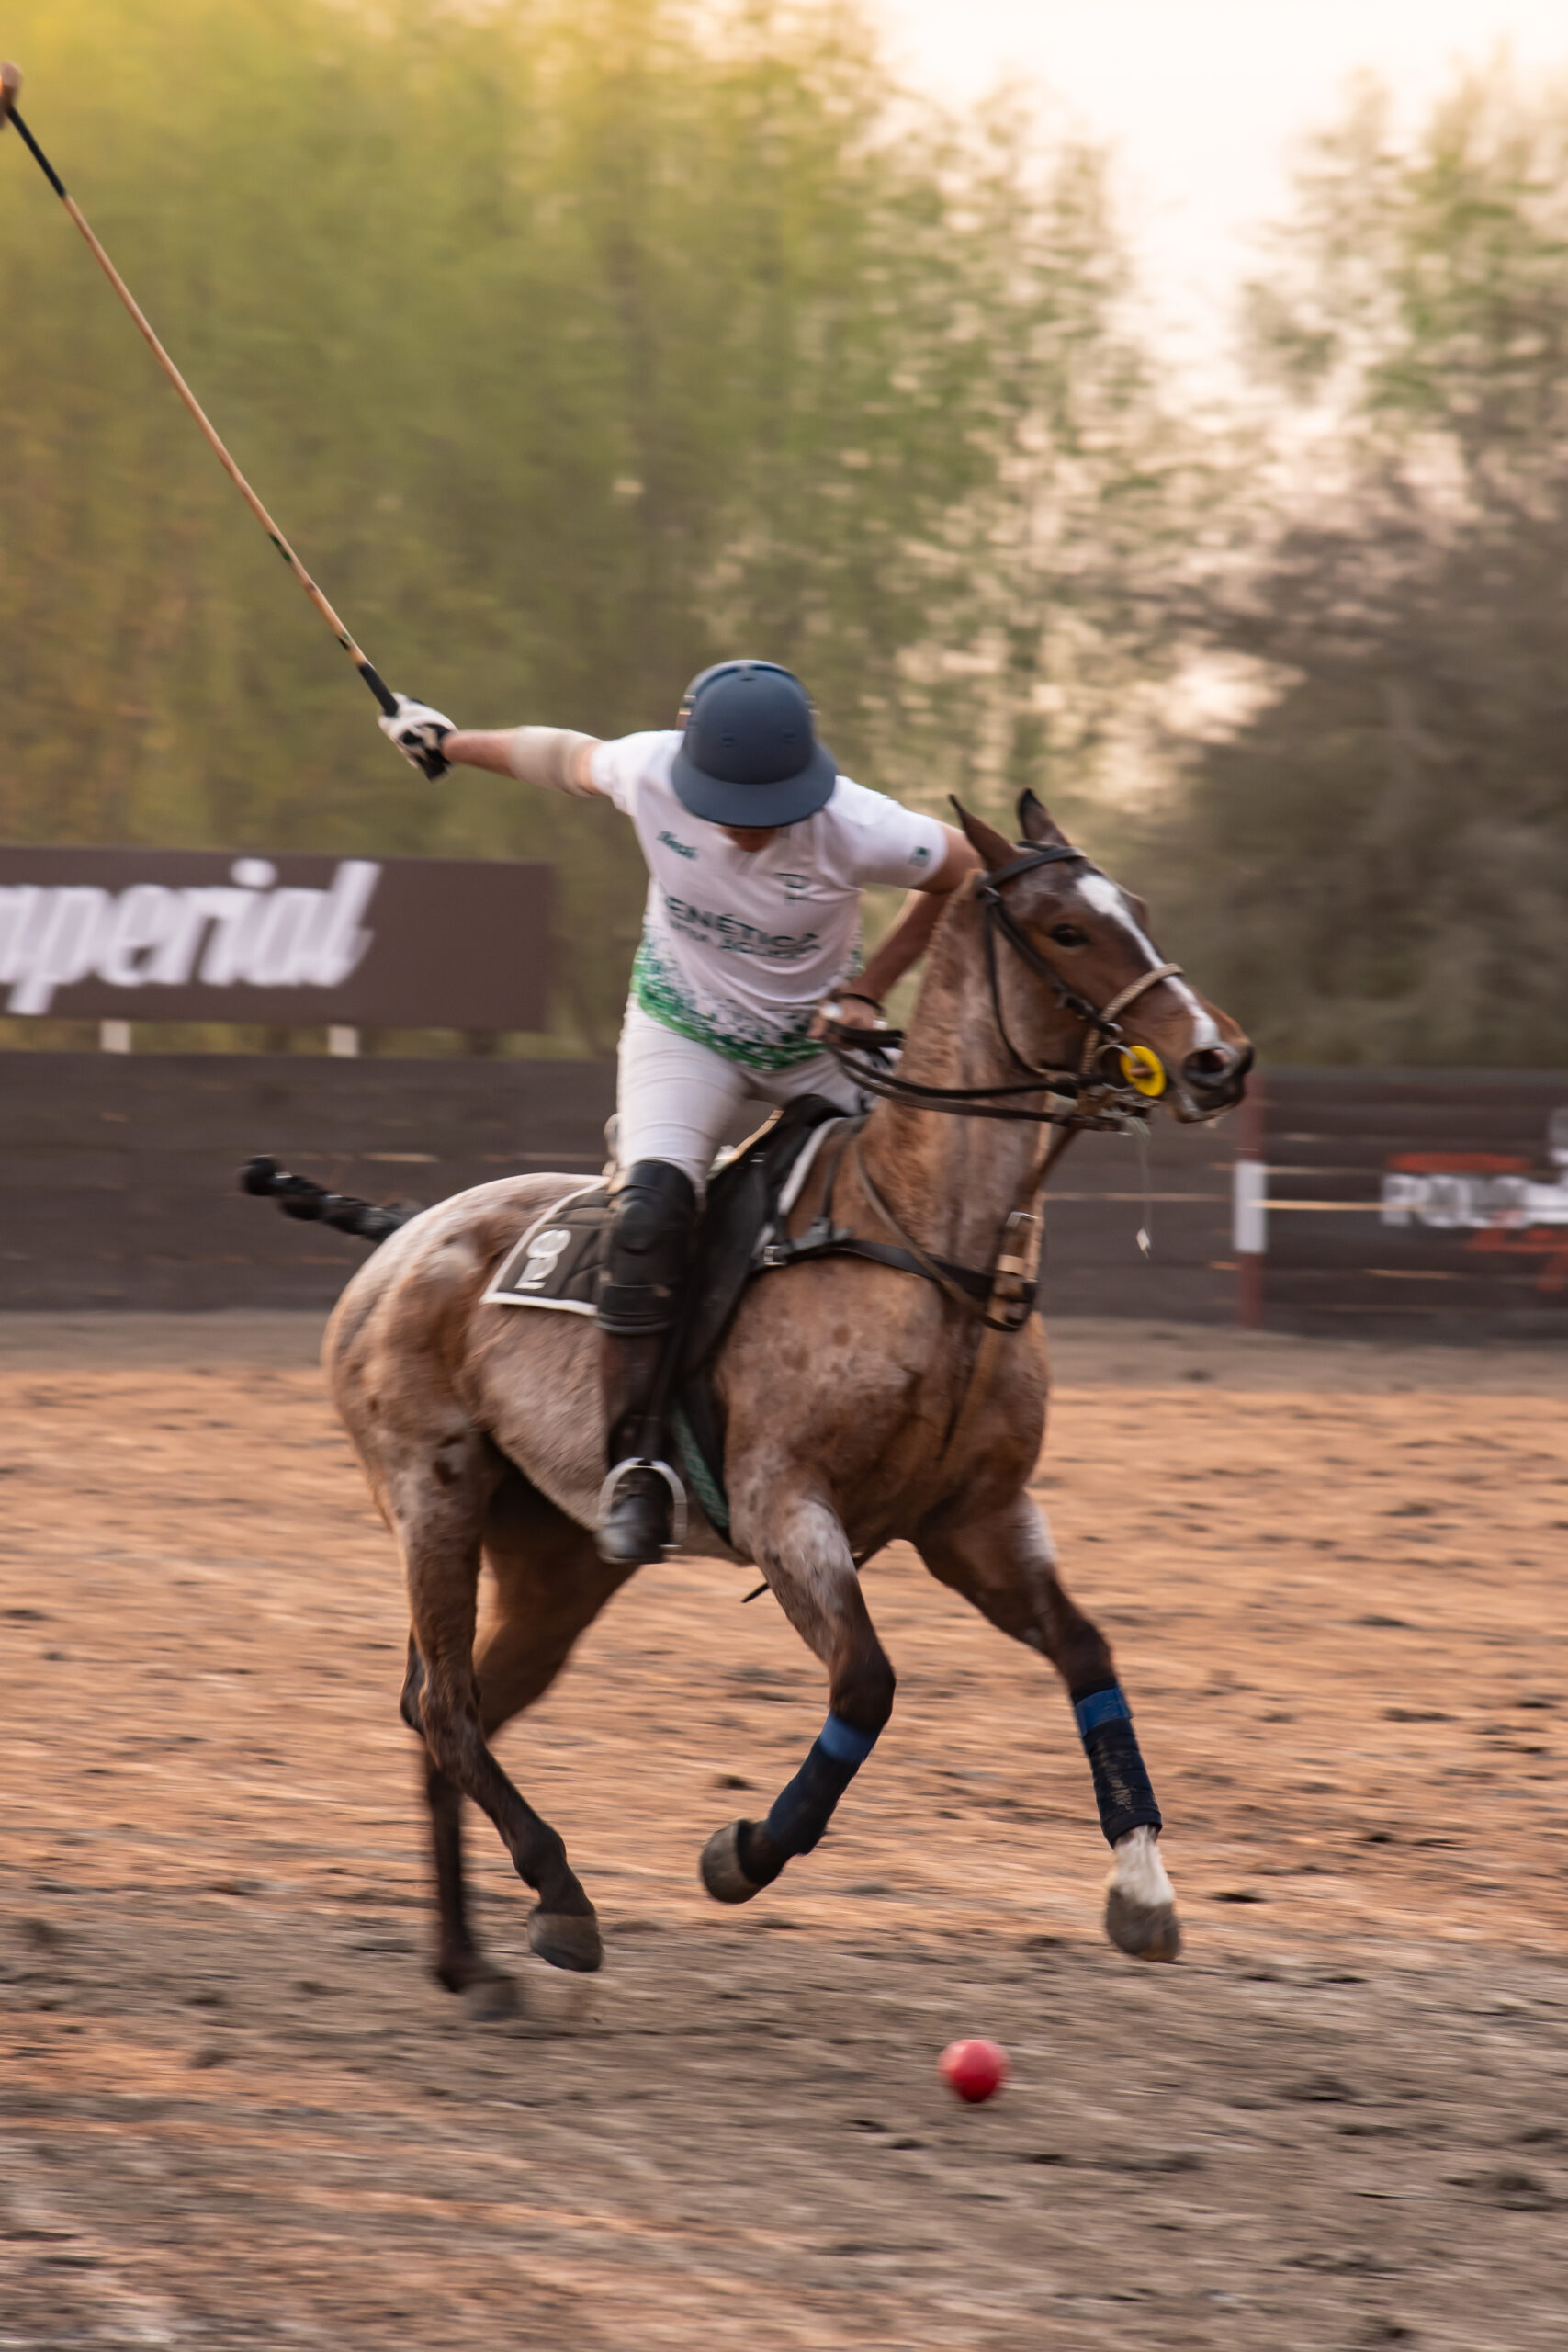 A professional polo player is riding his brown and white horse. His mallet being held high in the air as he is about to hit the polo ball.